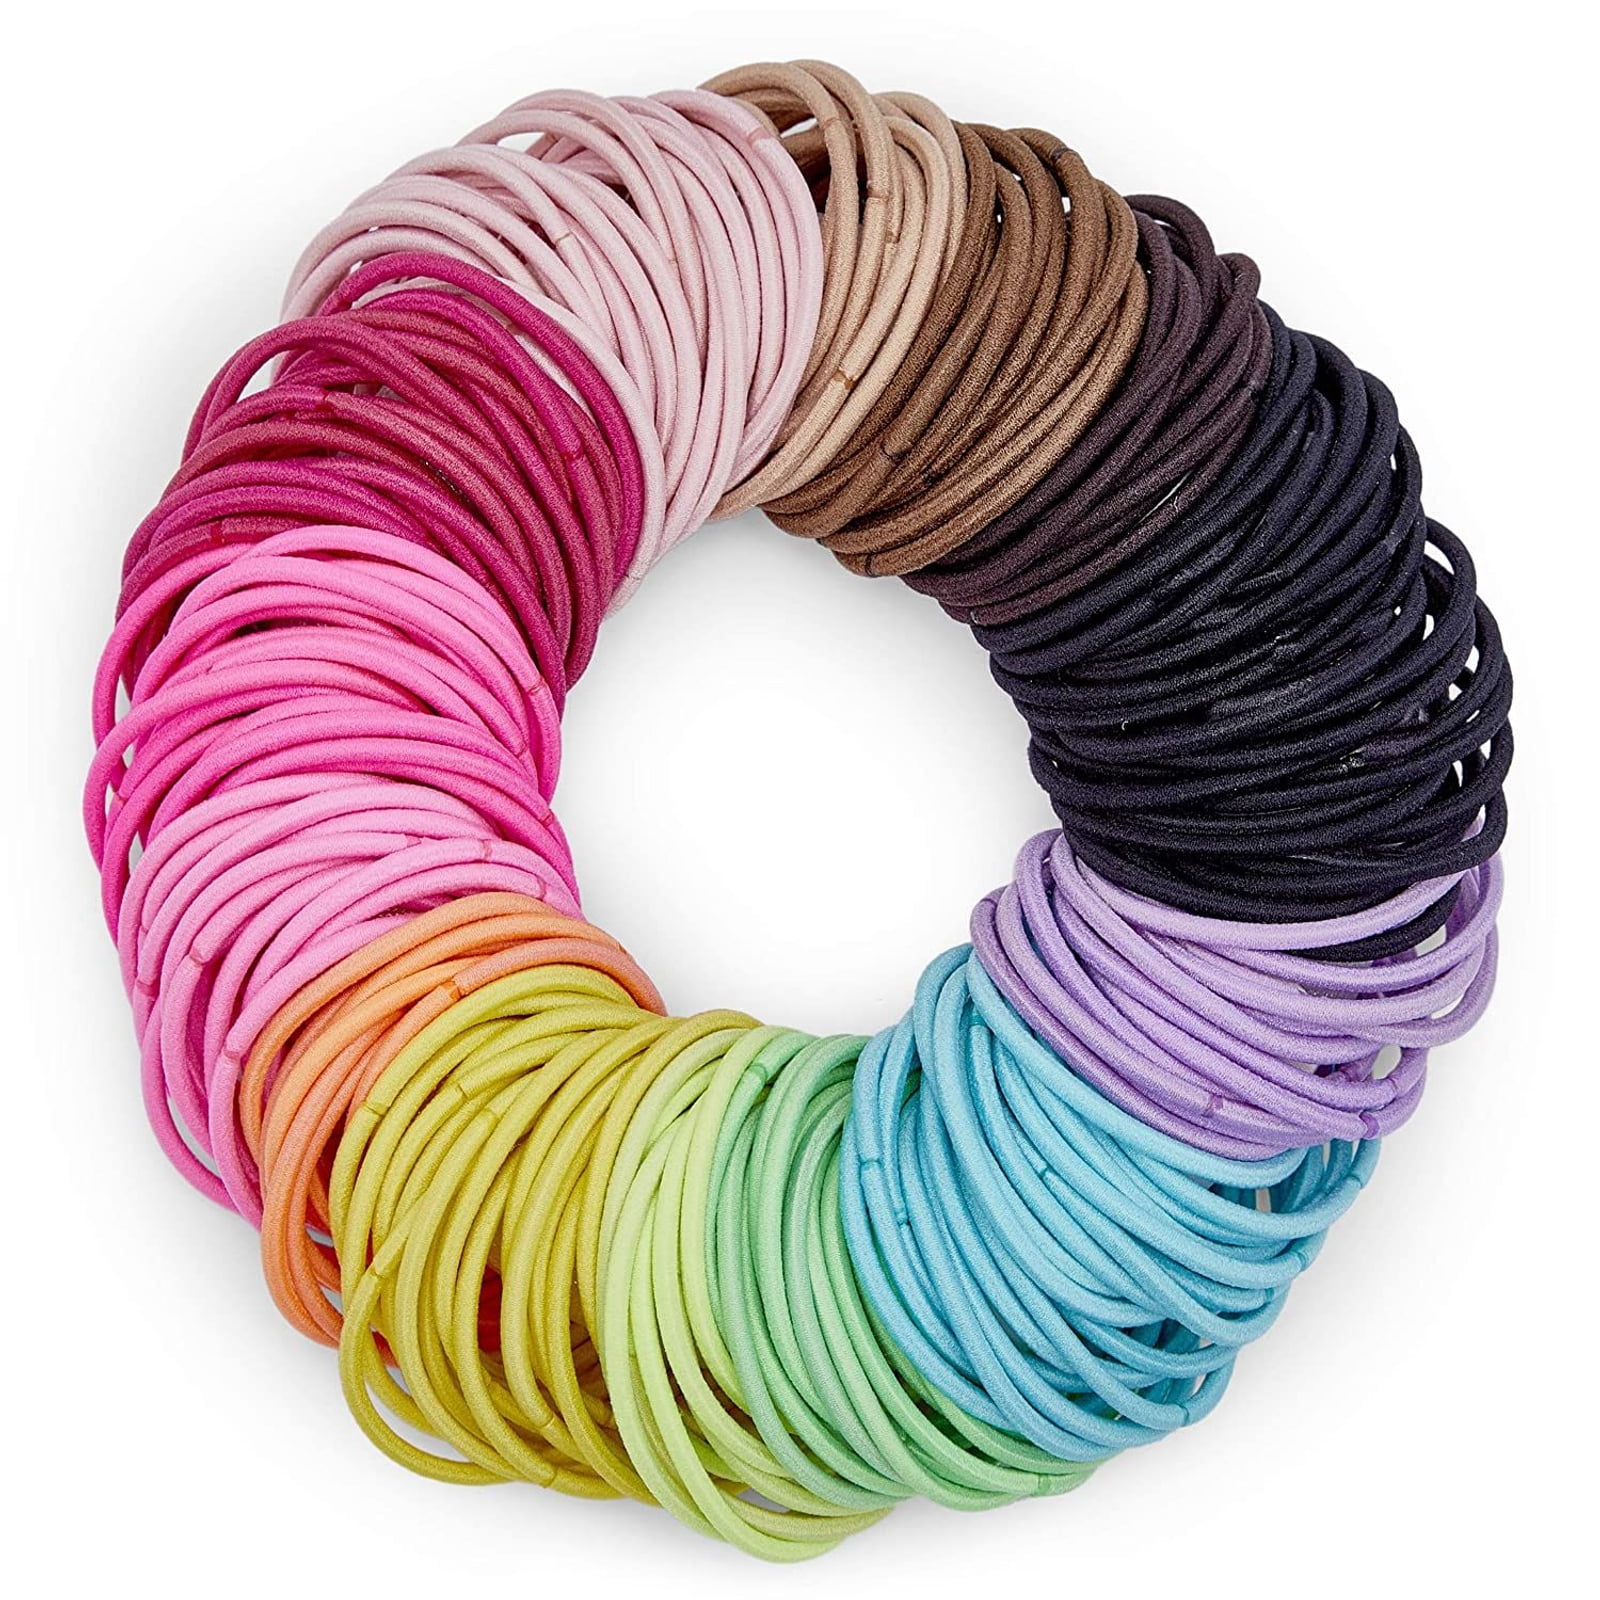 36 x WOMAN SMALL ELASTIC HAIR BANDS GIRLS PONY TAIL HAIRBAND COLOUR 